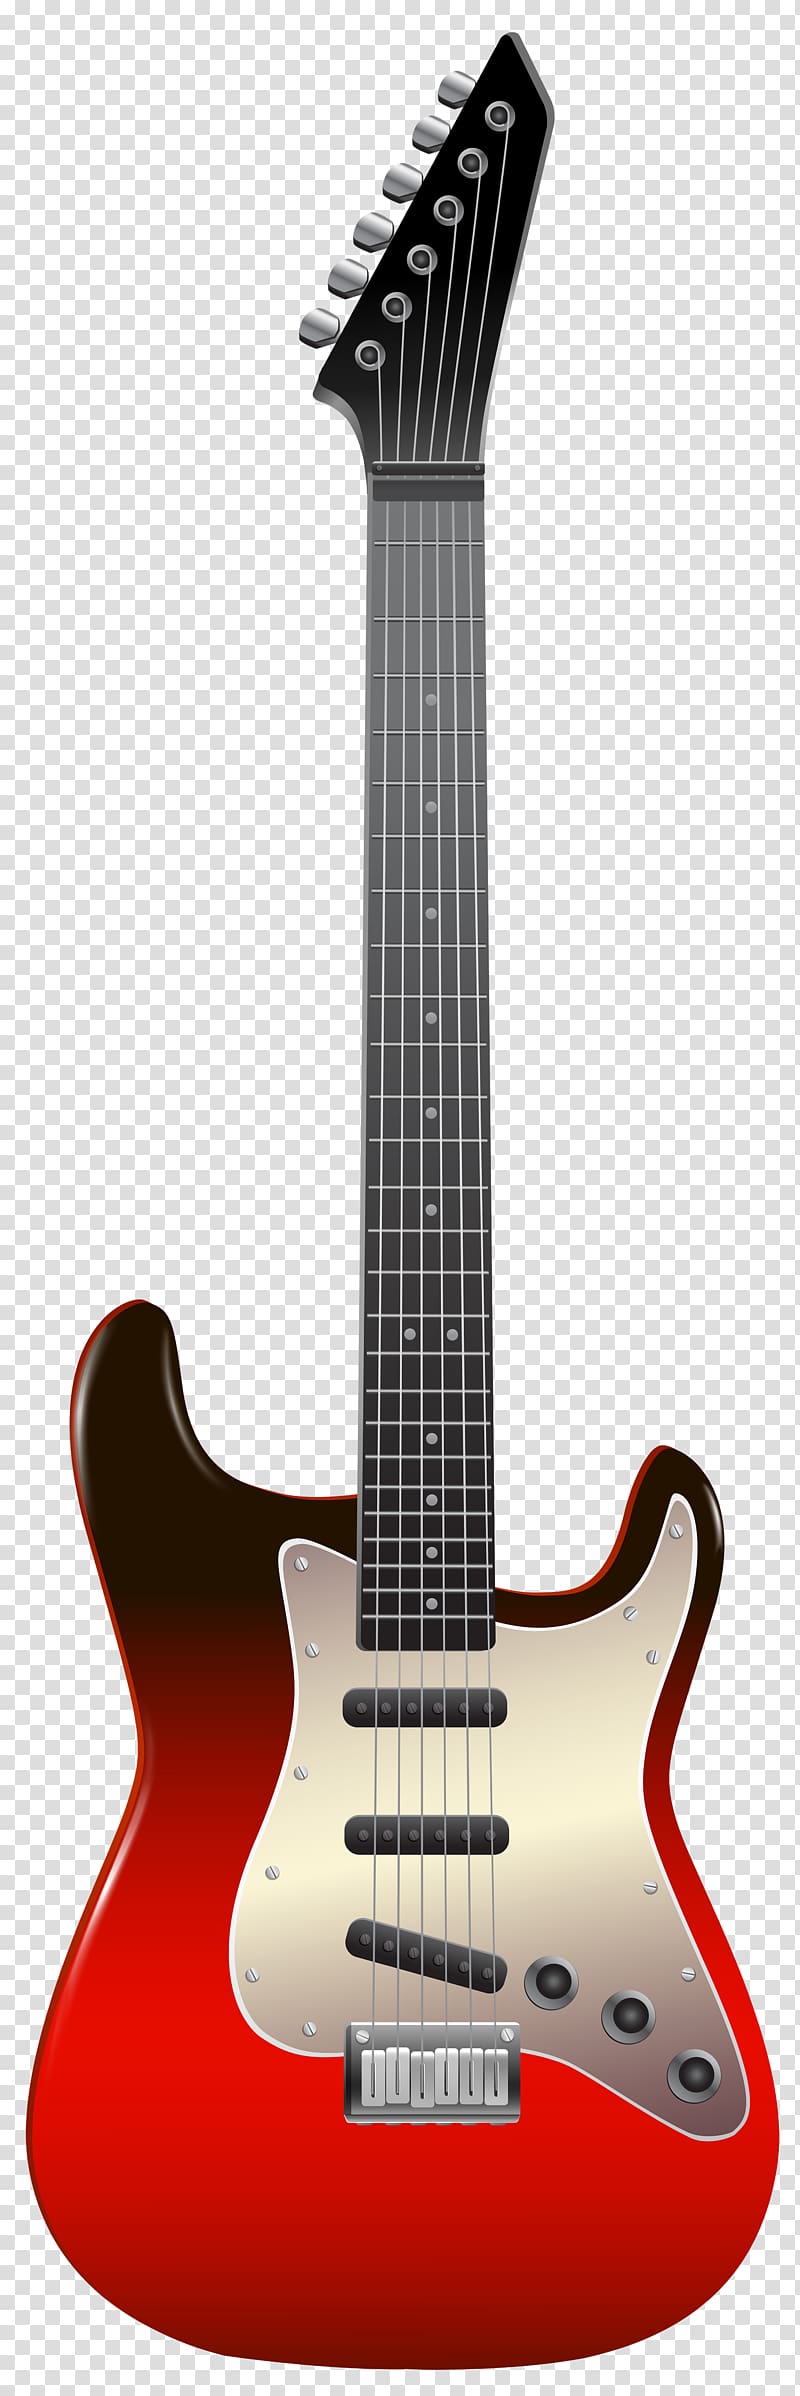 red and black electric guitar, Electric guitar Bass guitar, Guitar transparent background PNG clipart